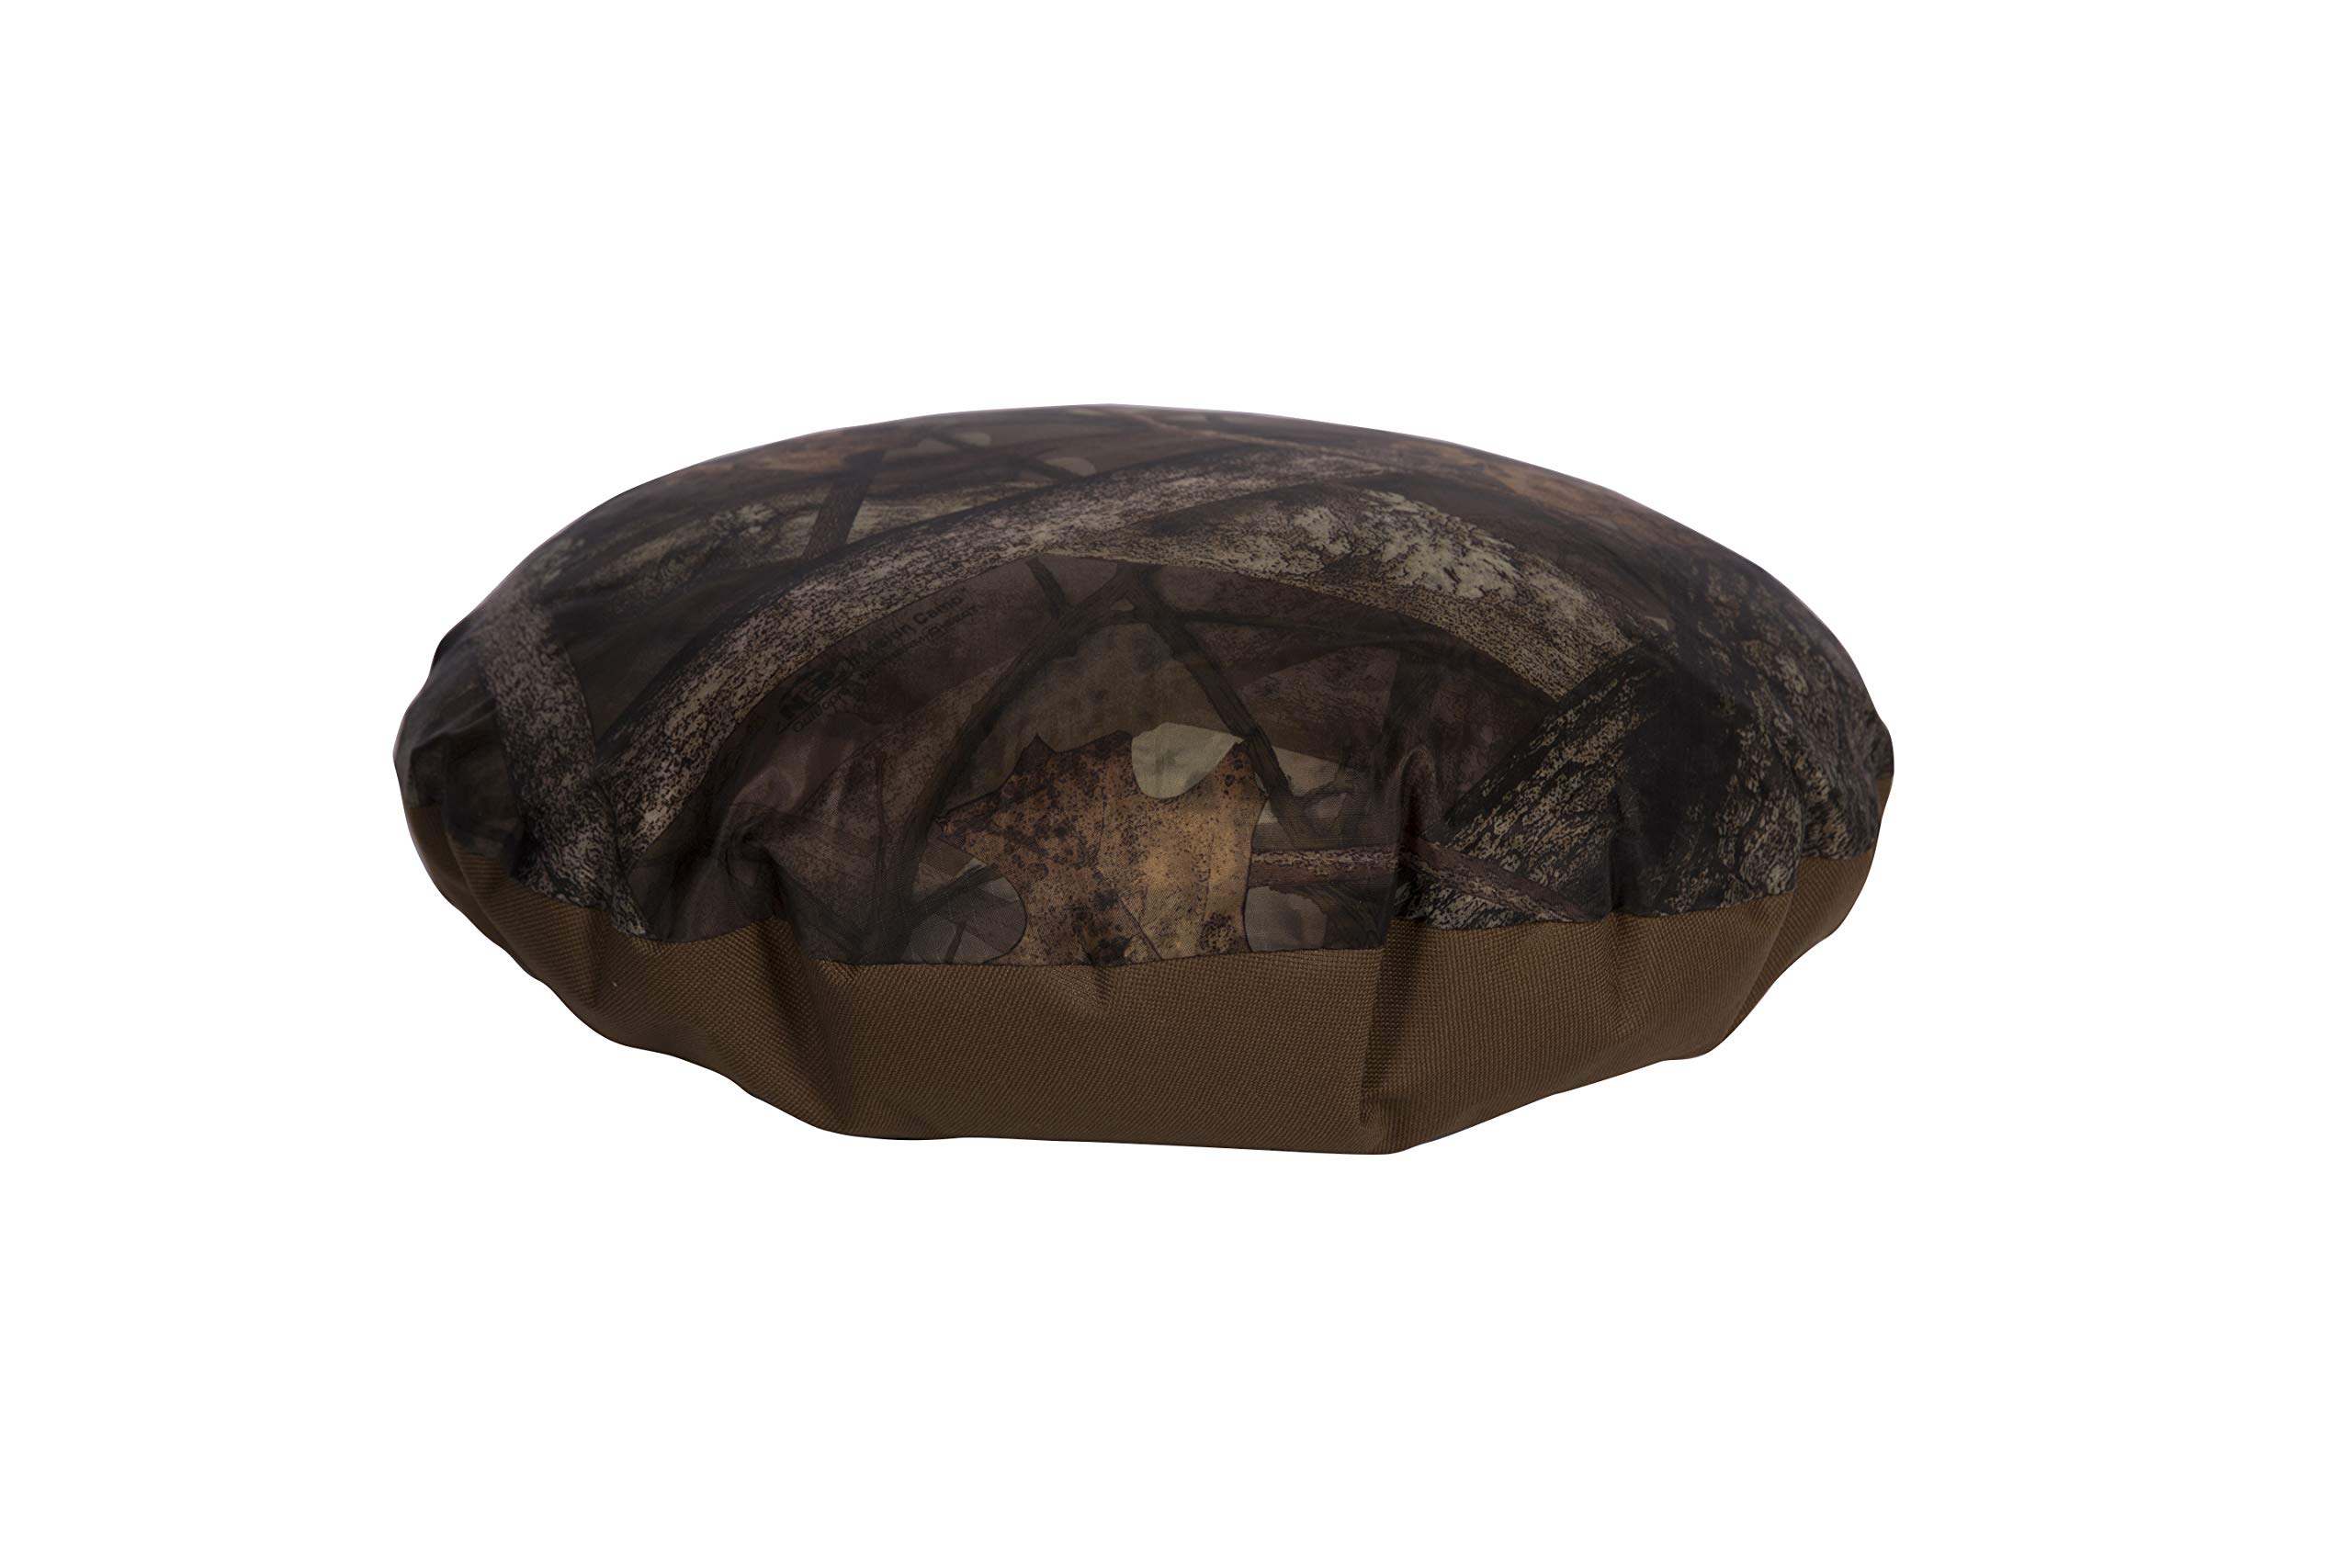 Northeast Products Therm-A-SEAT Heat-a-Seat Insulated Hunting Seat Cushion/Pillow